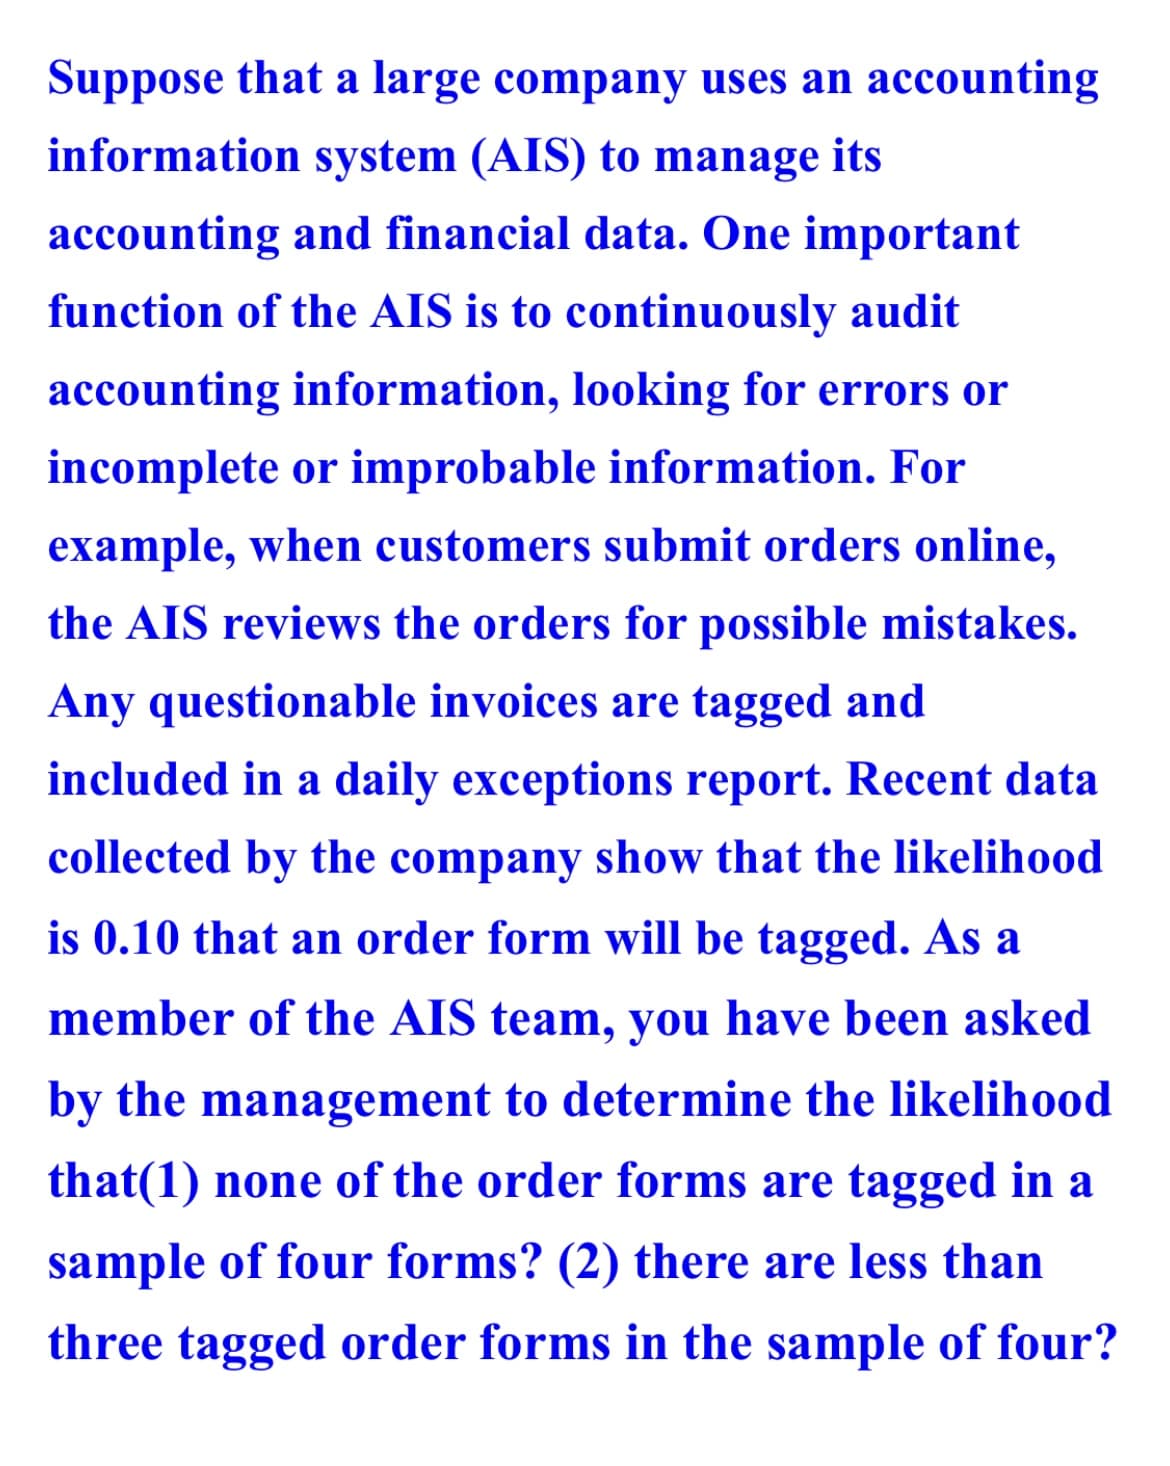 Suppose that a large company uses an accounting
information system (AIS) to manage its
accounting and financial data. One important
function of the AIS is to continuously audit
accounting information, looking for errors or
incomplete or improbable information. For
example, when customers submit orders online,
the AIS reviews the orders for possible mistakes.
Any questionable invoices are tagged and
included in a daily exceptions report. Recent data
collected by the company show that the likelihood
is 0.10 that an order form will be tagged. As a
member of the AIS team, you have been asked
by the management to determine the likelihood
that(1) none of the order forms are tagged in a
sample of four forms? (2) there are less than
three tagged order forms in the sample of four?
